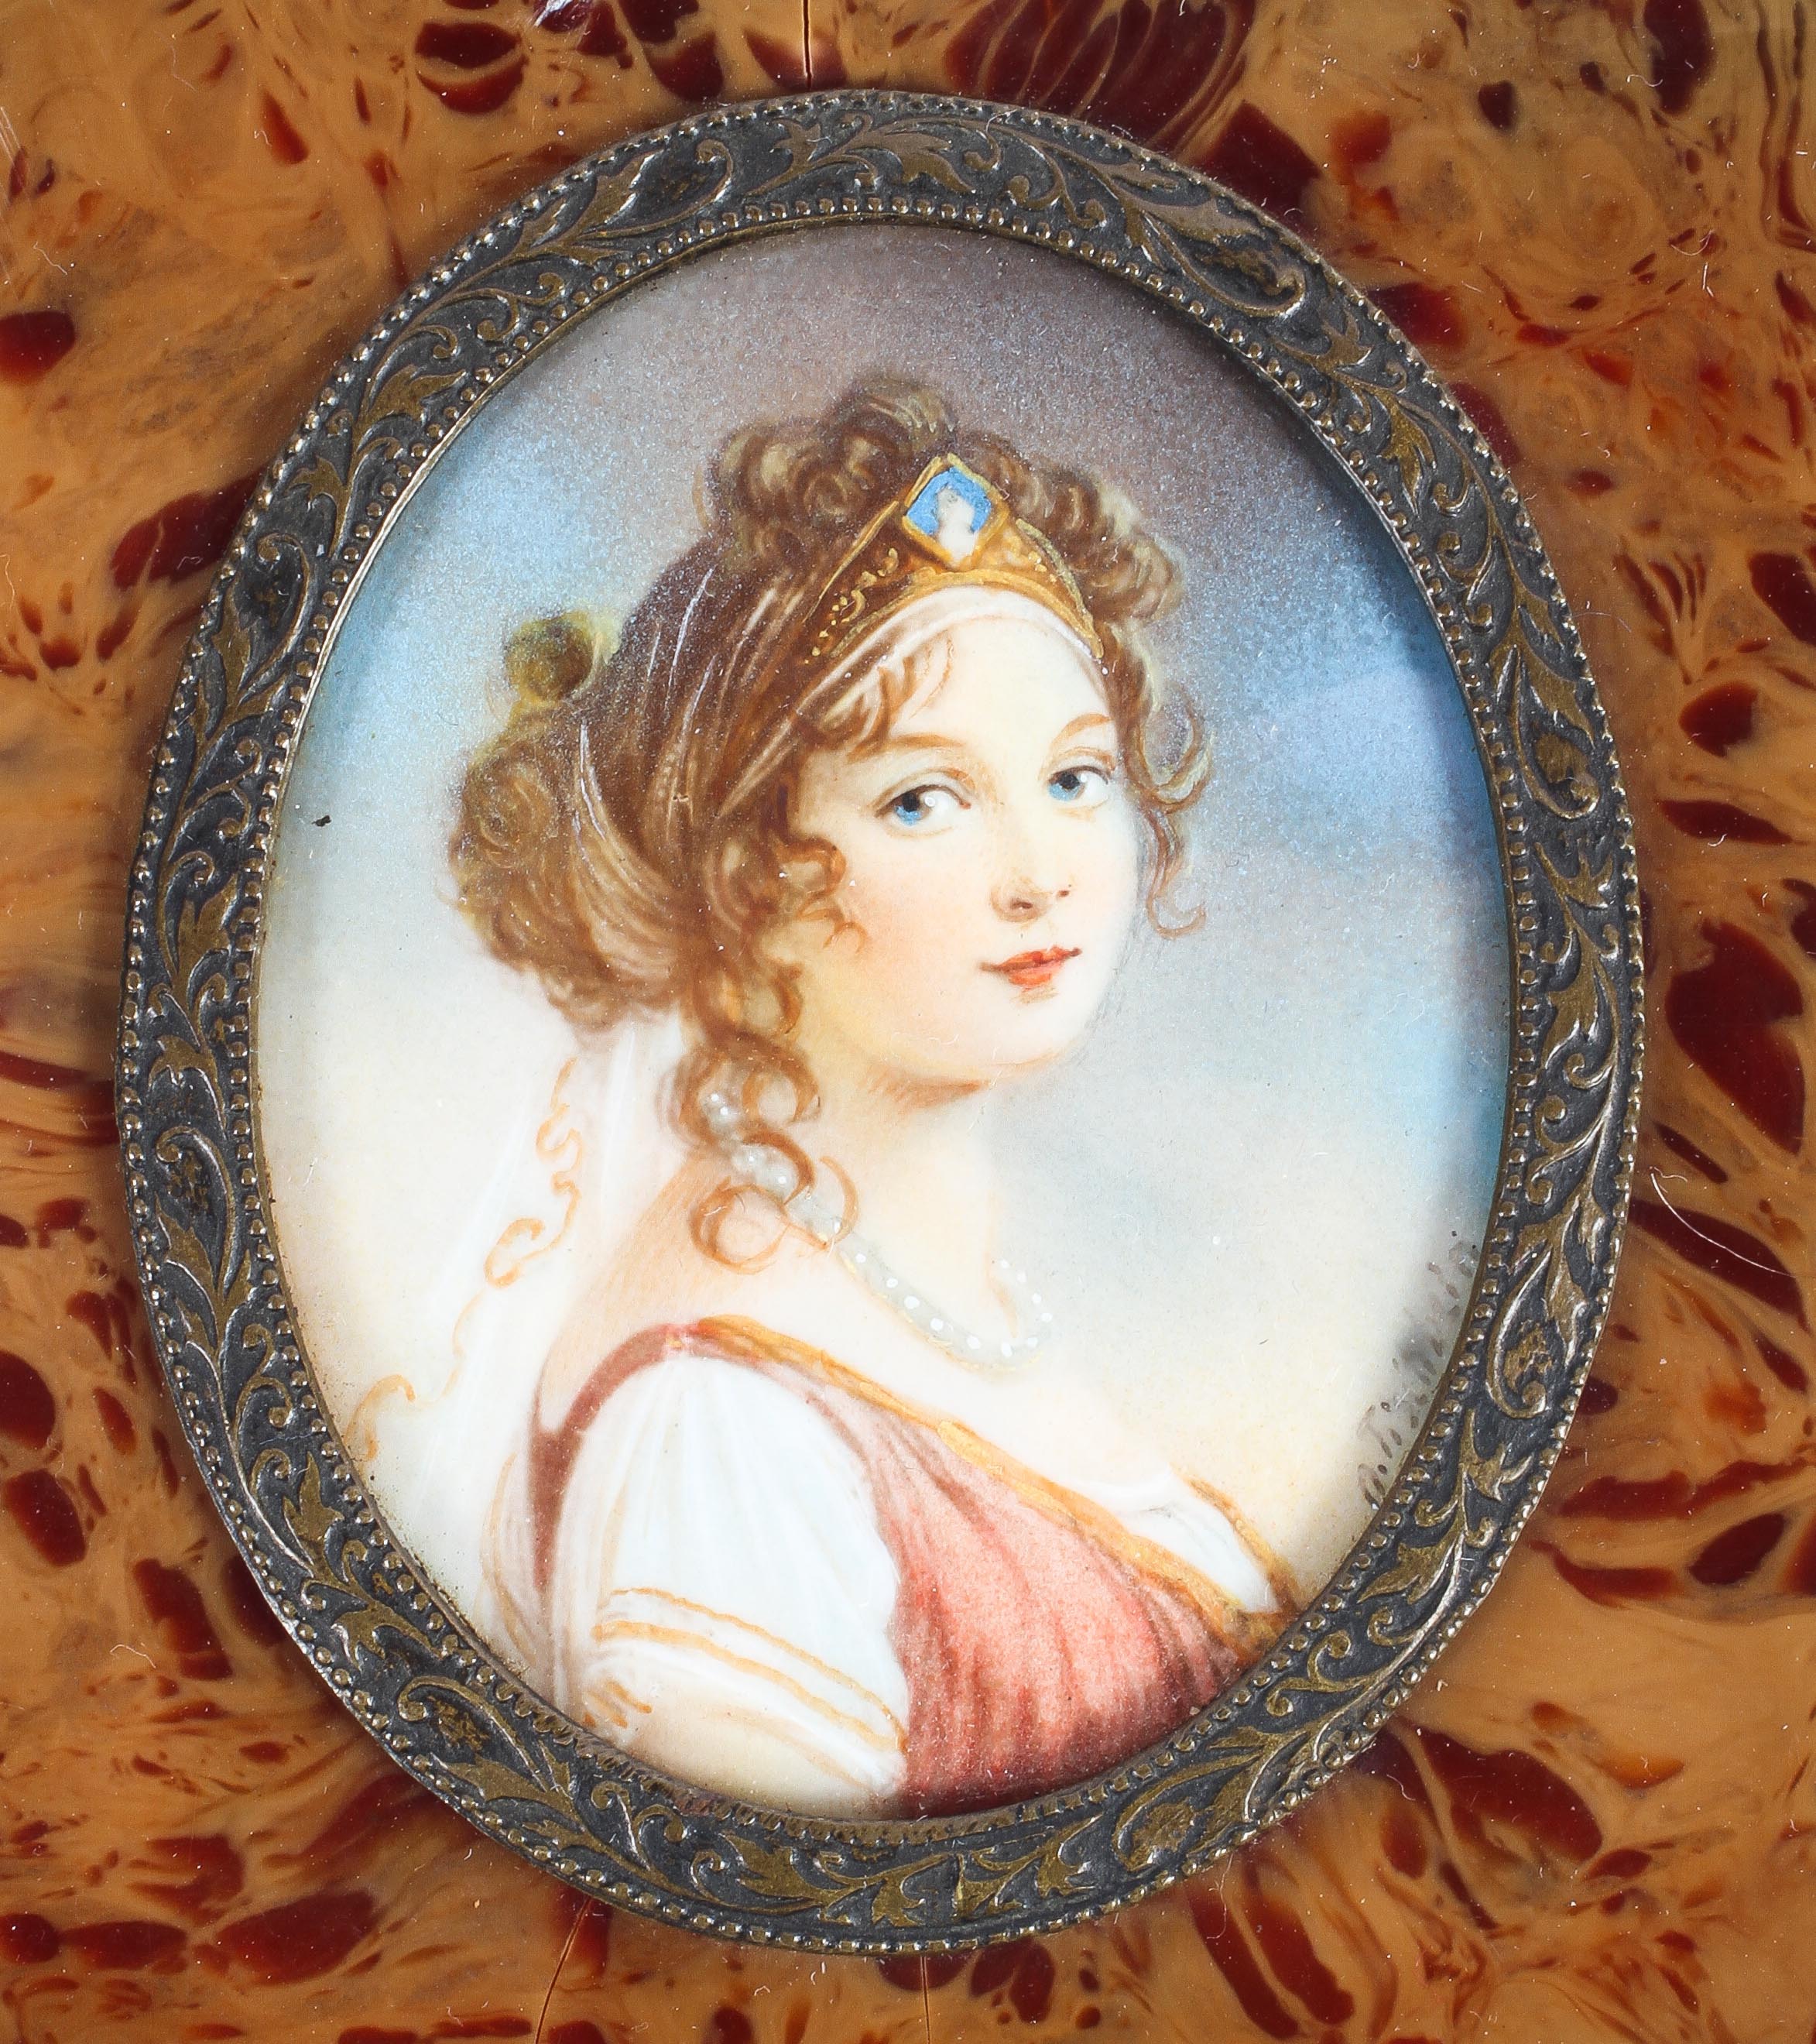 N Tischbein, (19th century, German School), portrait miniature of lady, watercolour on ivory, - Image 2 of 3